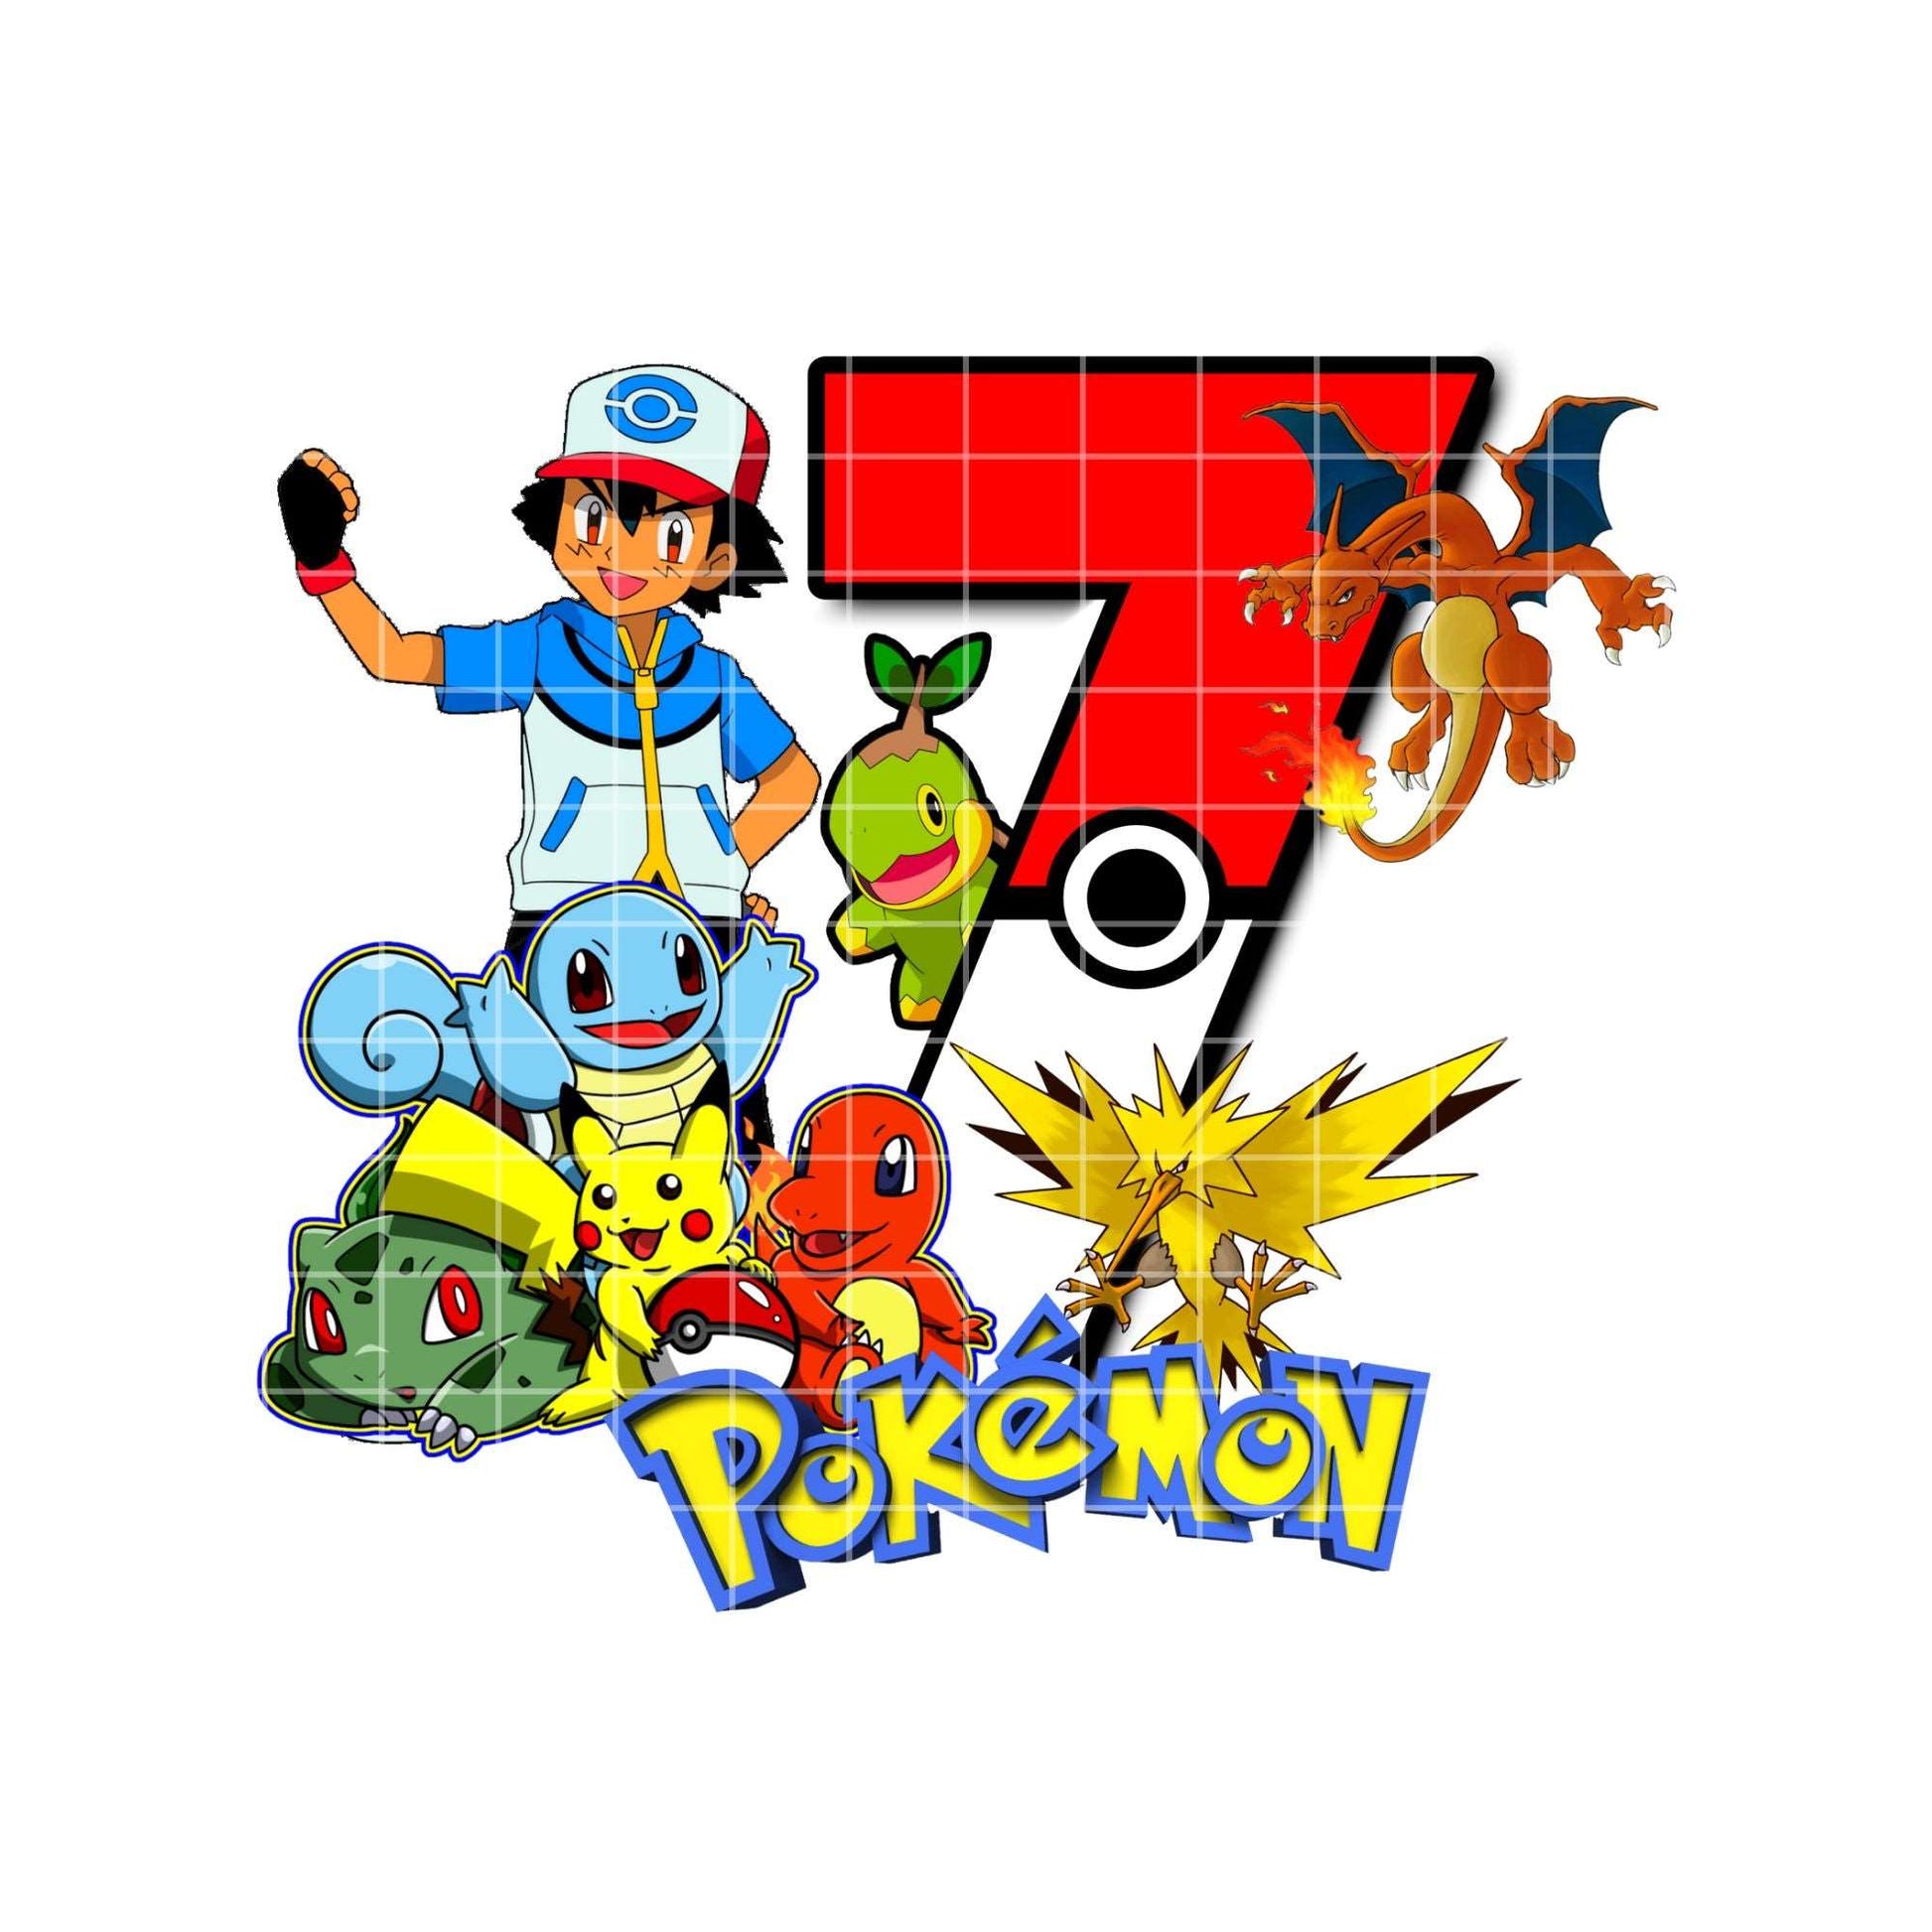 6th,7th, and 8th pokemon birthday t shirt sublimation design png